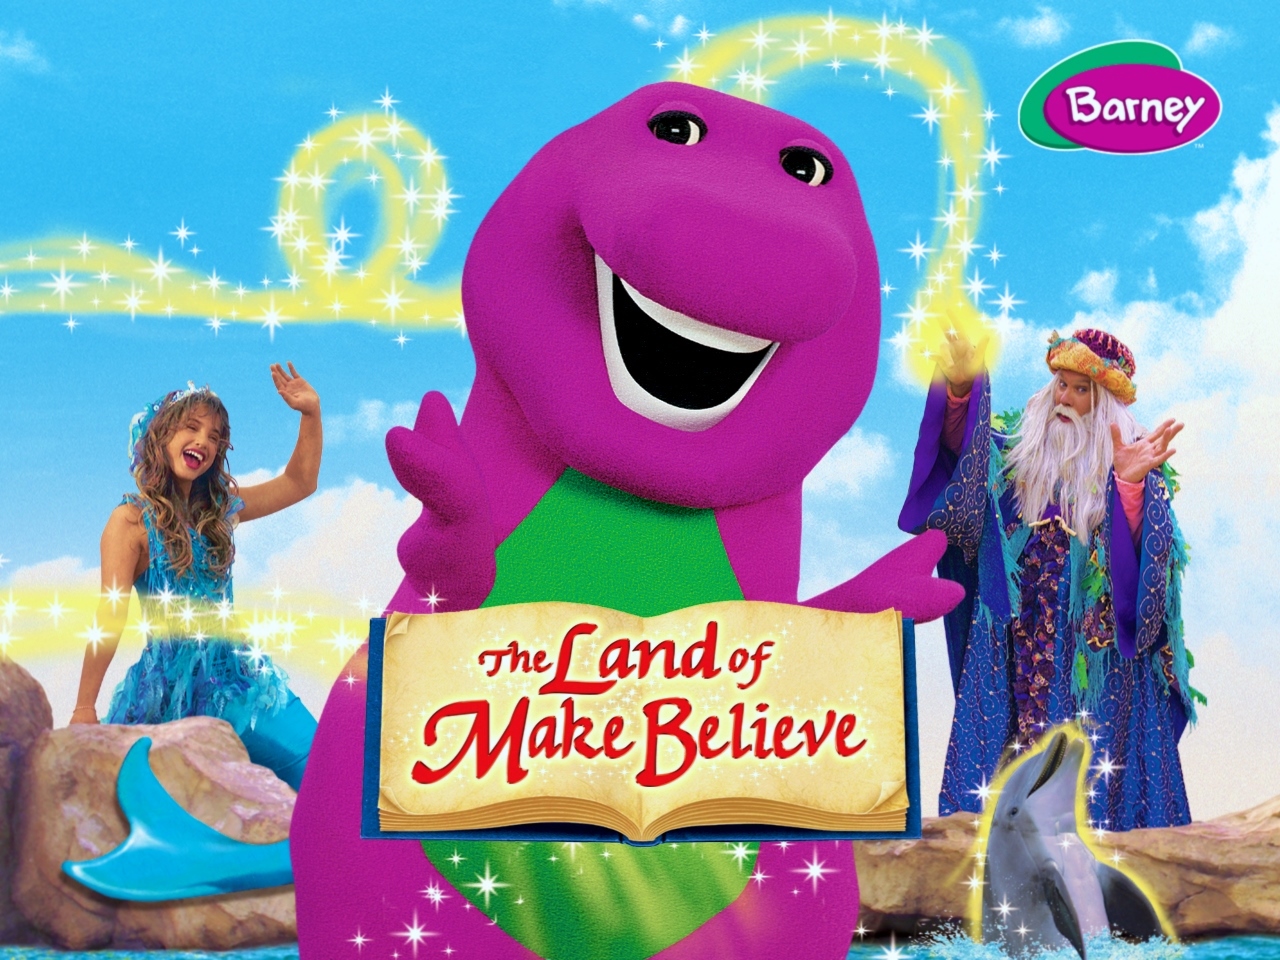 Free Download Barney Wallpaper Barney The Land Of Make 1280x960 For